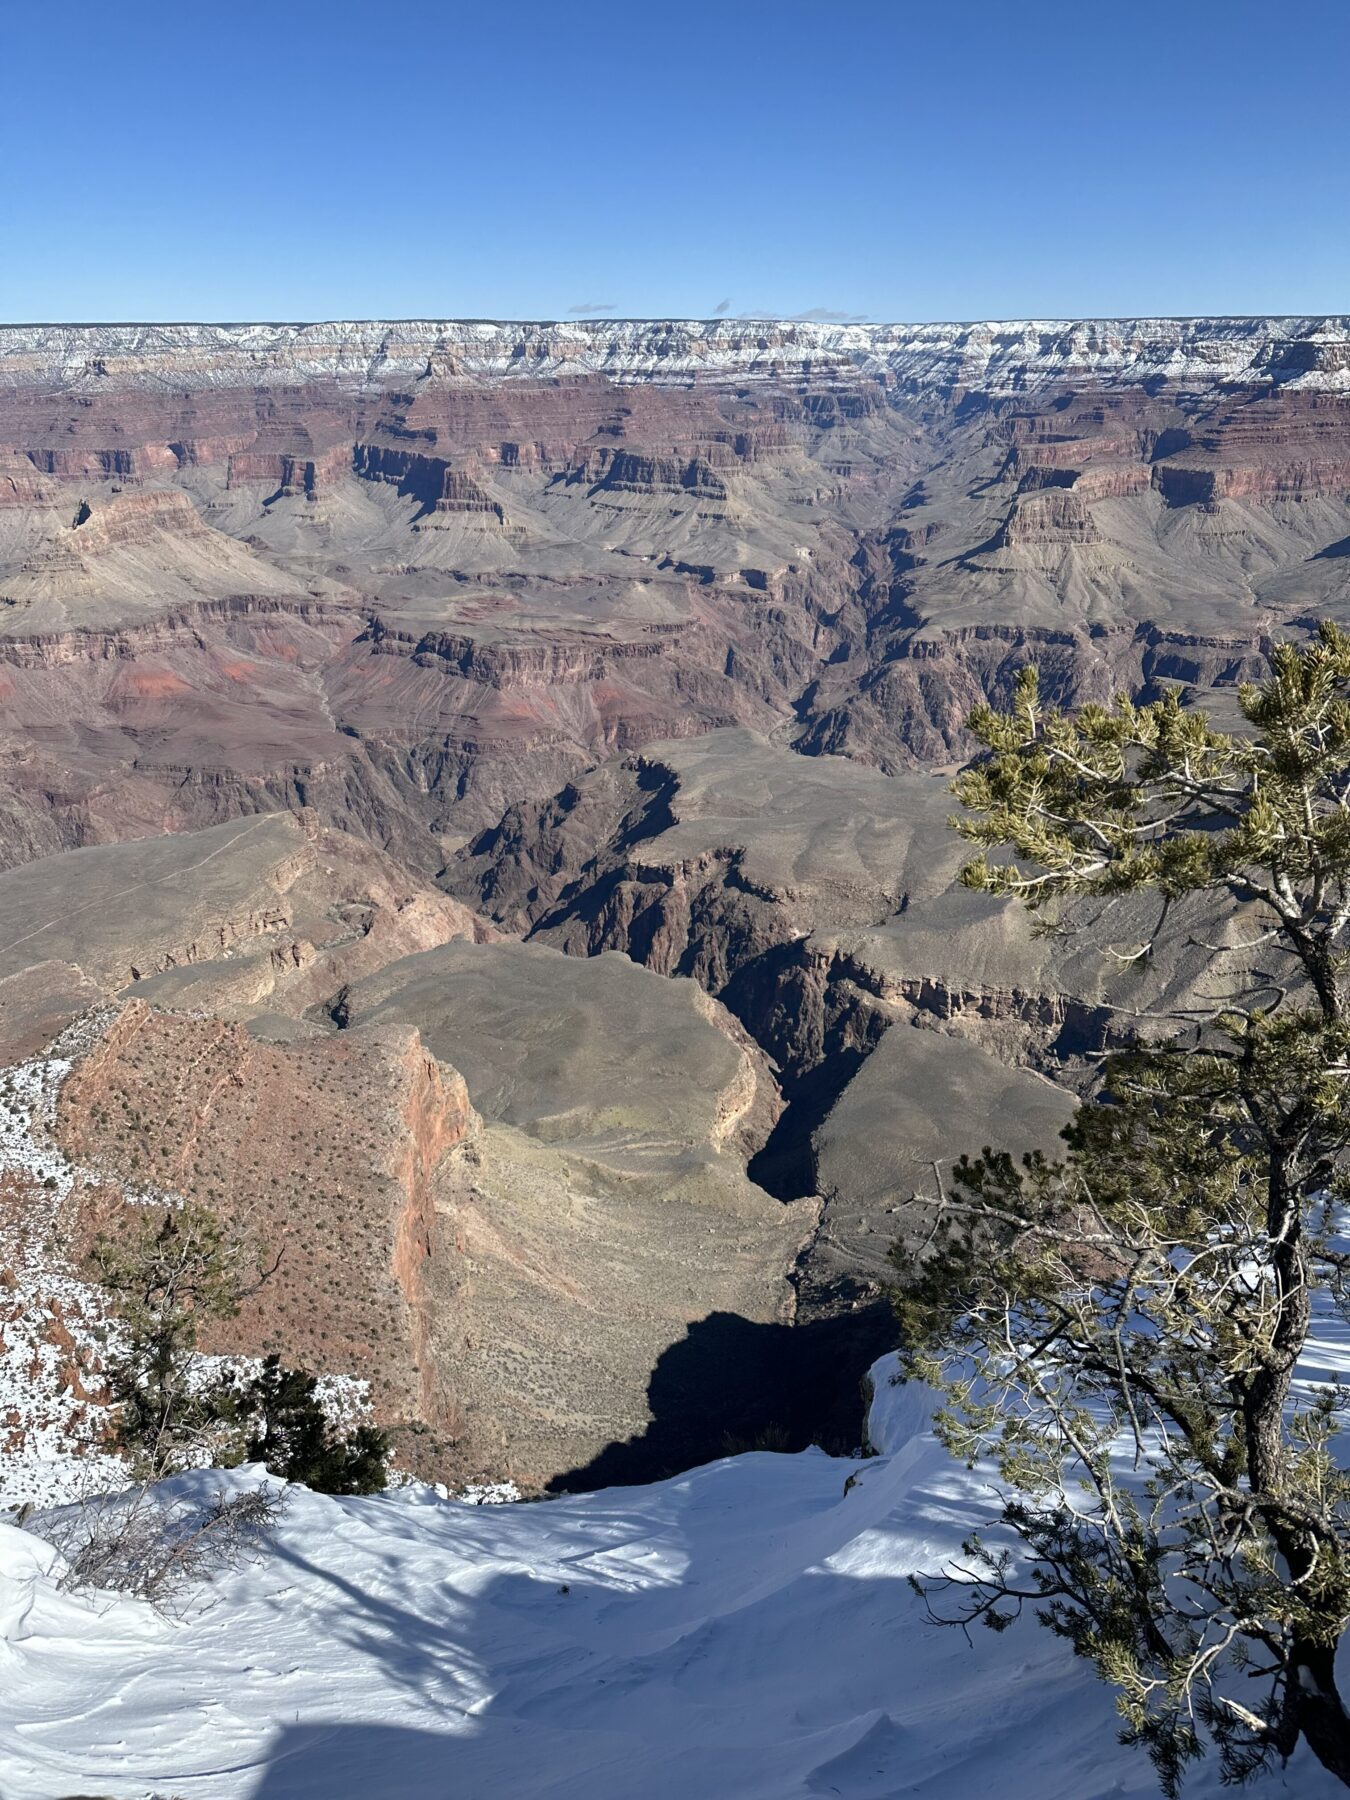 Visiting Grand Canyon in Winter